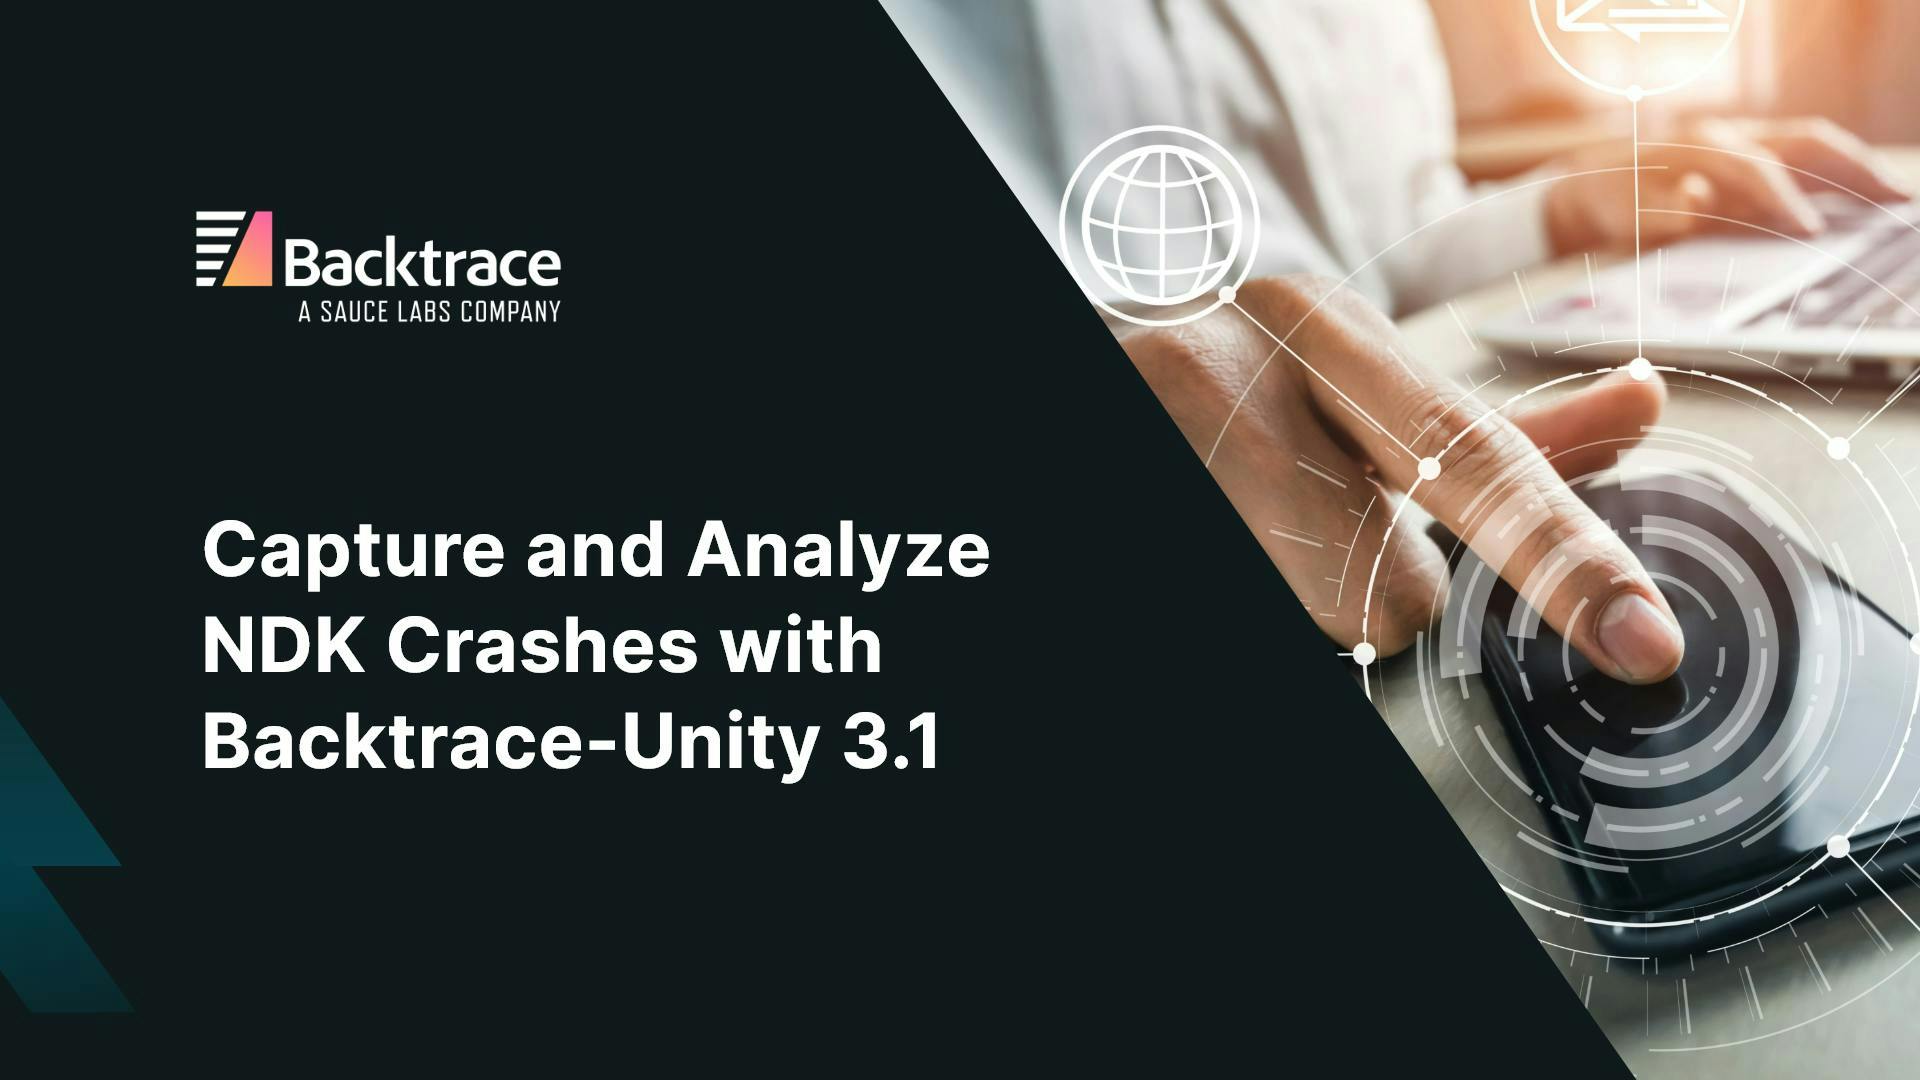 Thumbnail image for blog post: Capture And Analyze NDK Crashes With Backtrace-Unity 3.1